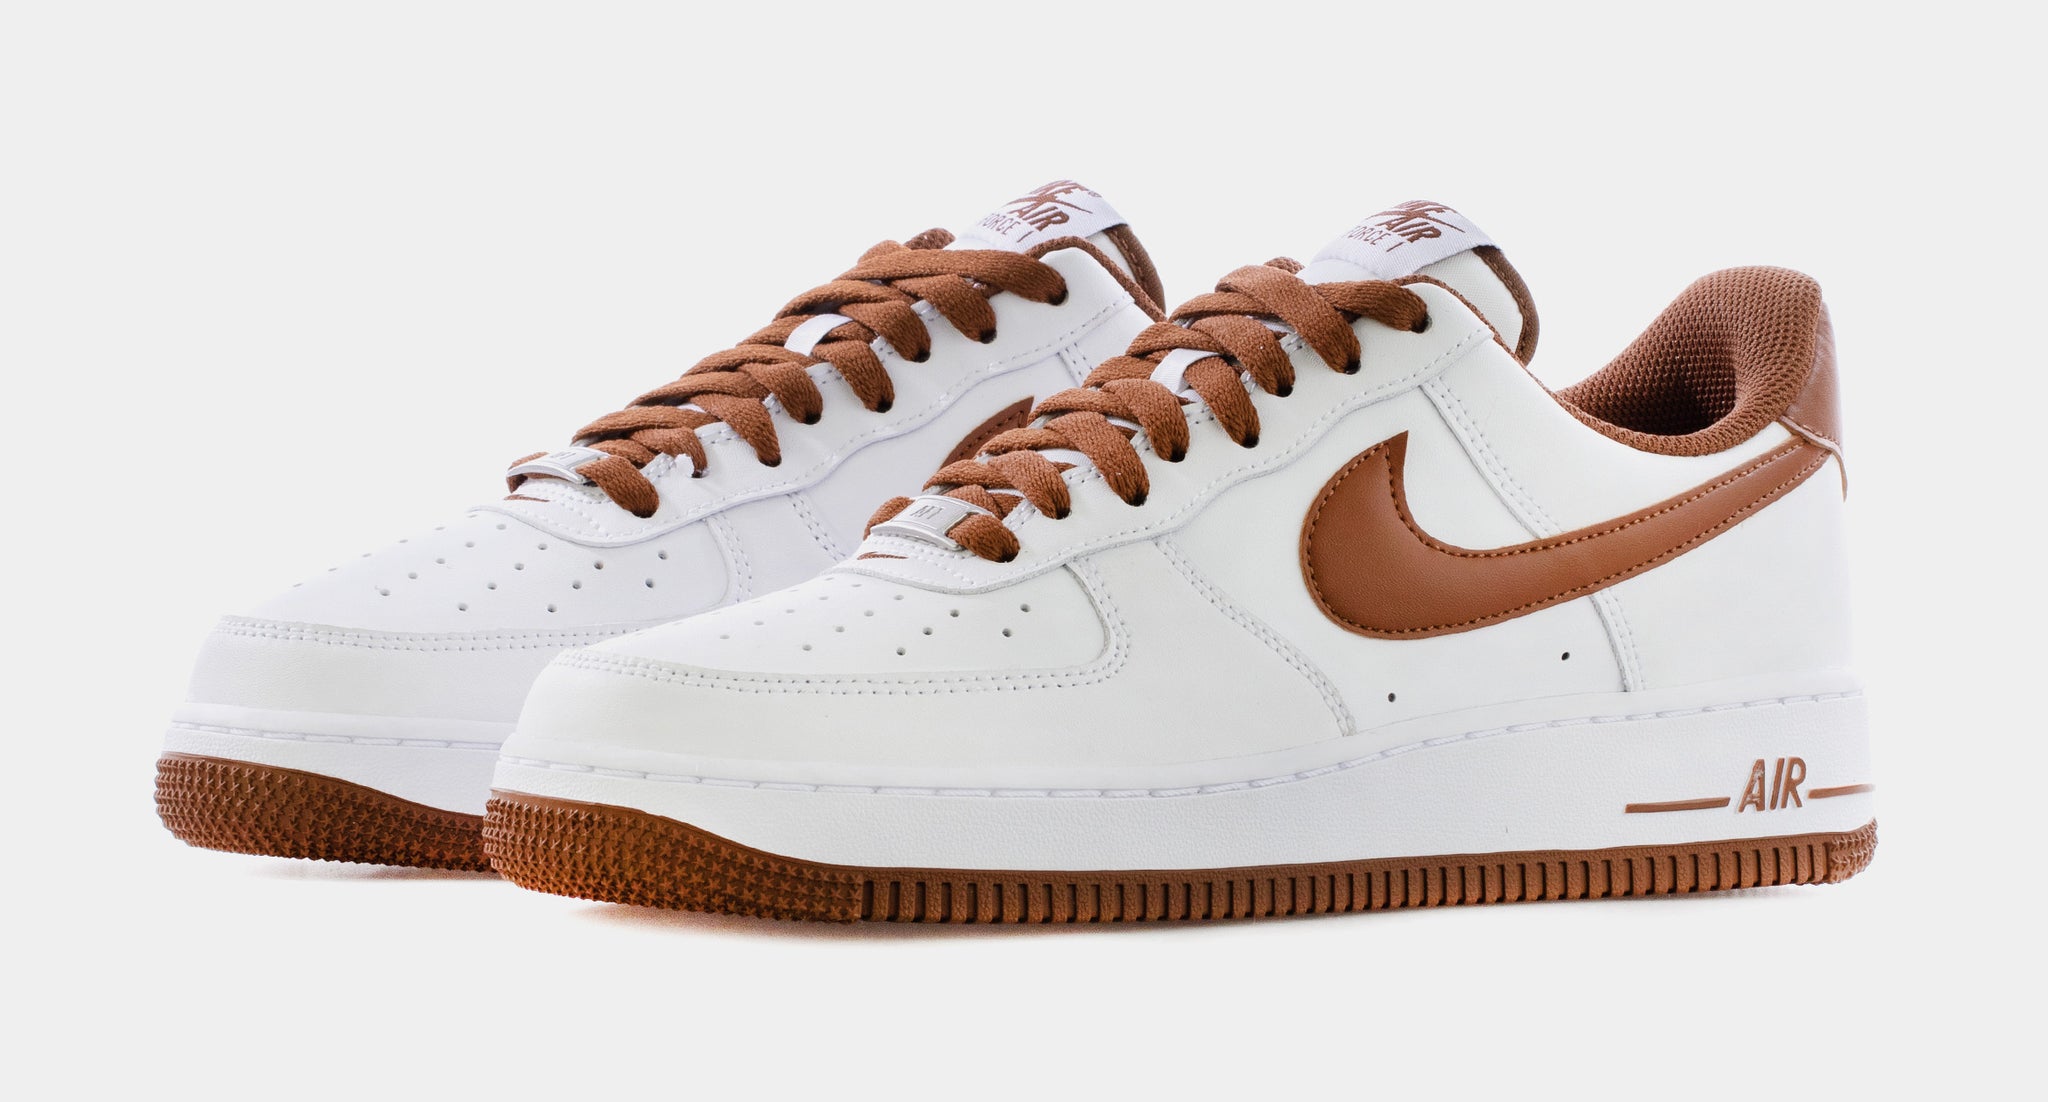 Nike Air Force 1 low brown white size 11 mens (DH7561-100)